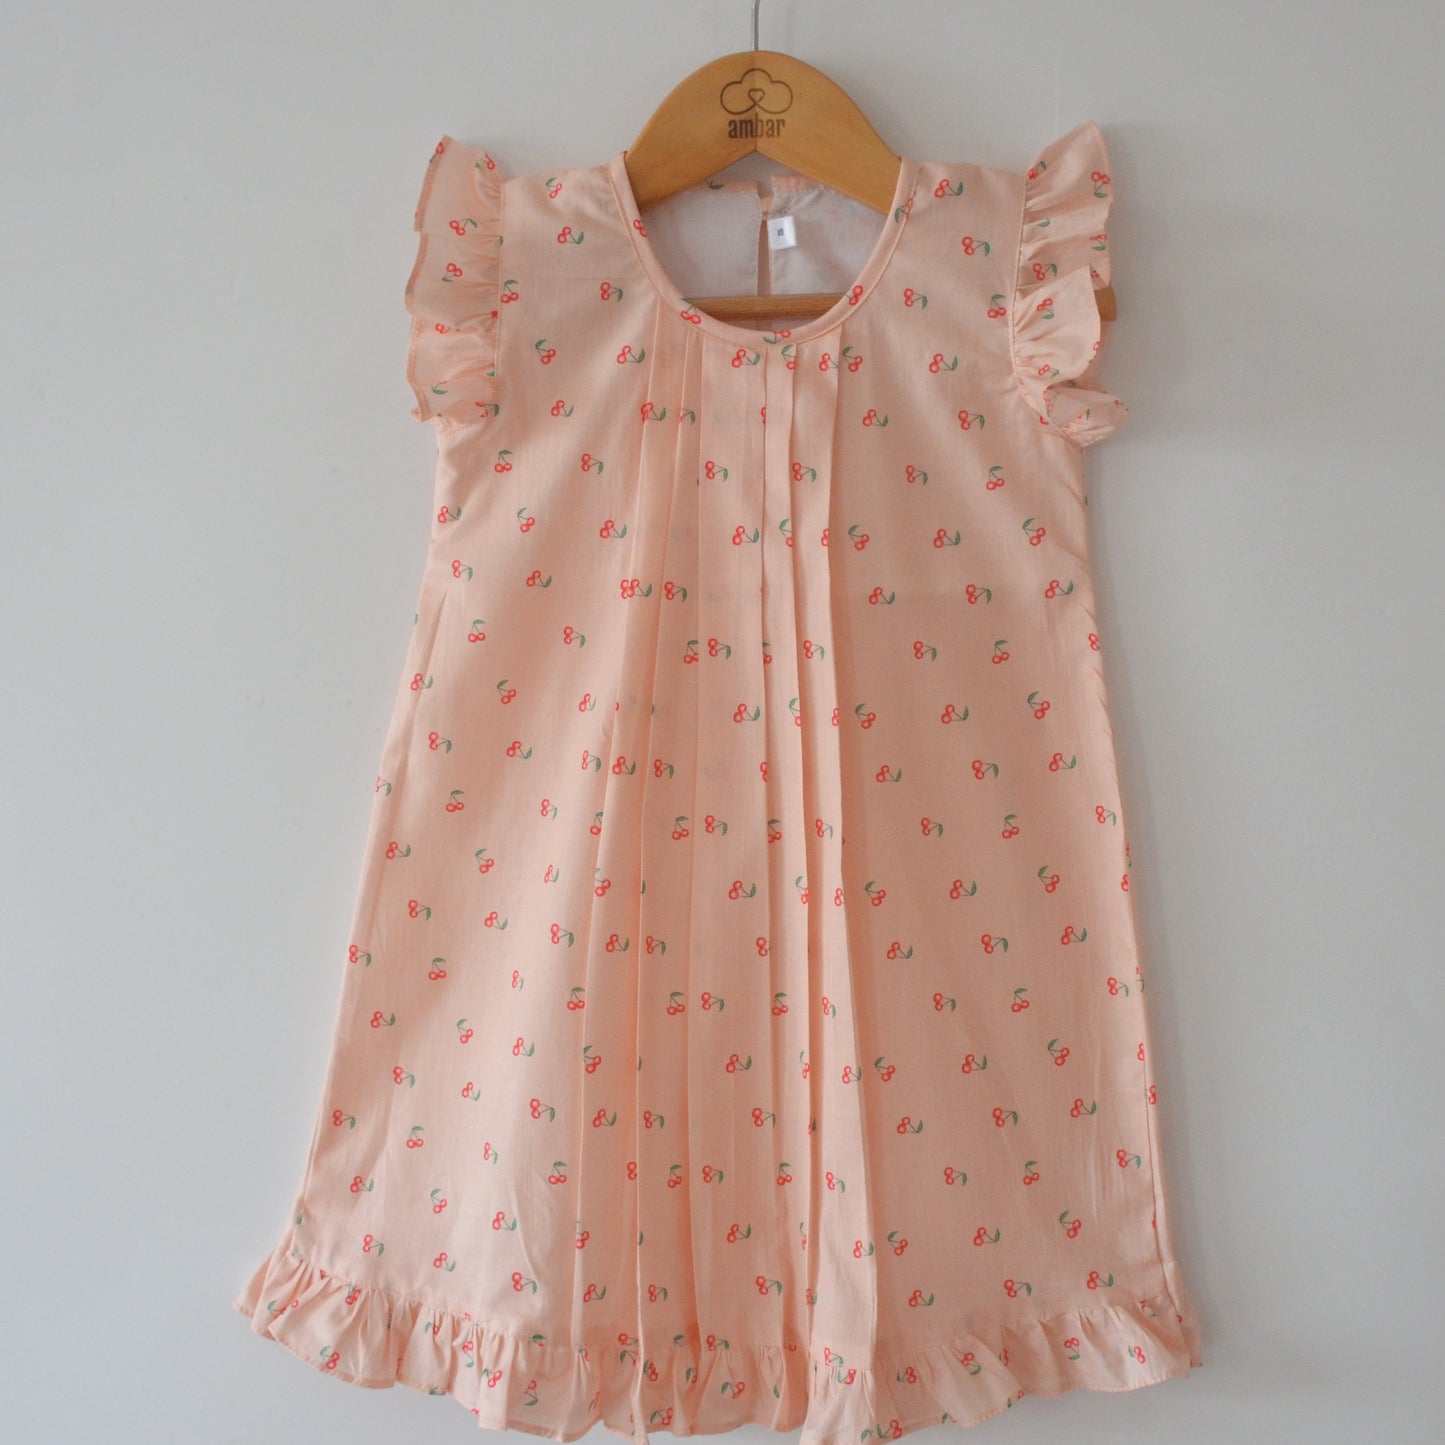 Matilda dress in cherry print with front pleats - Peach